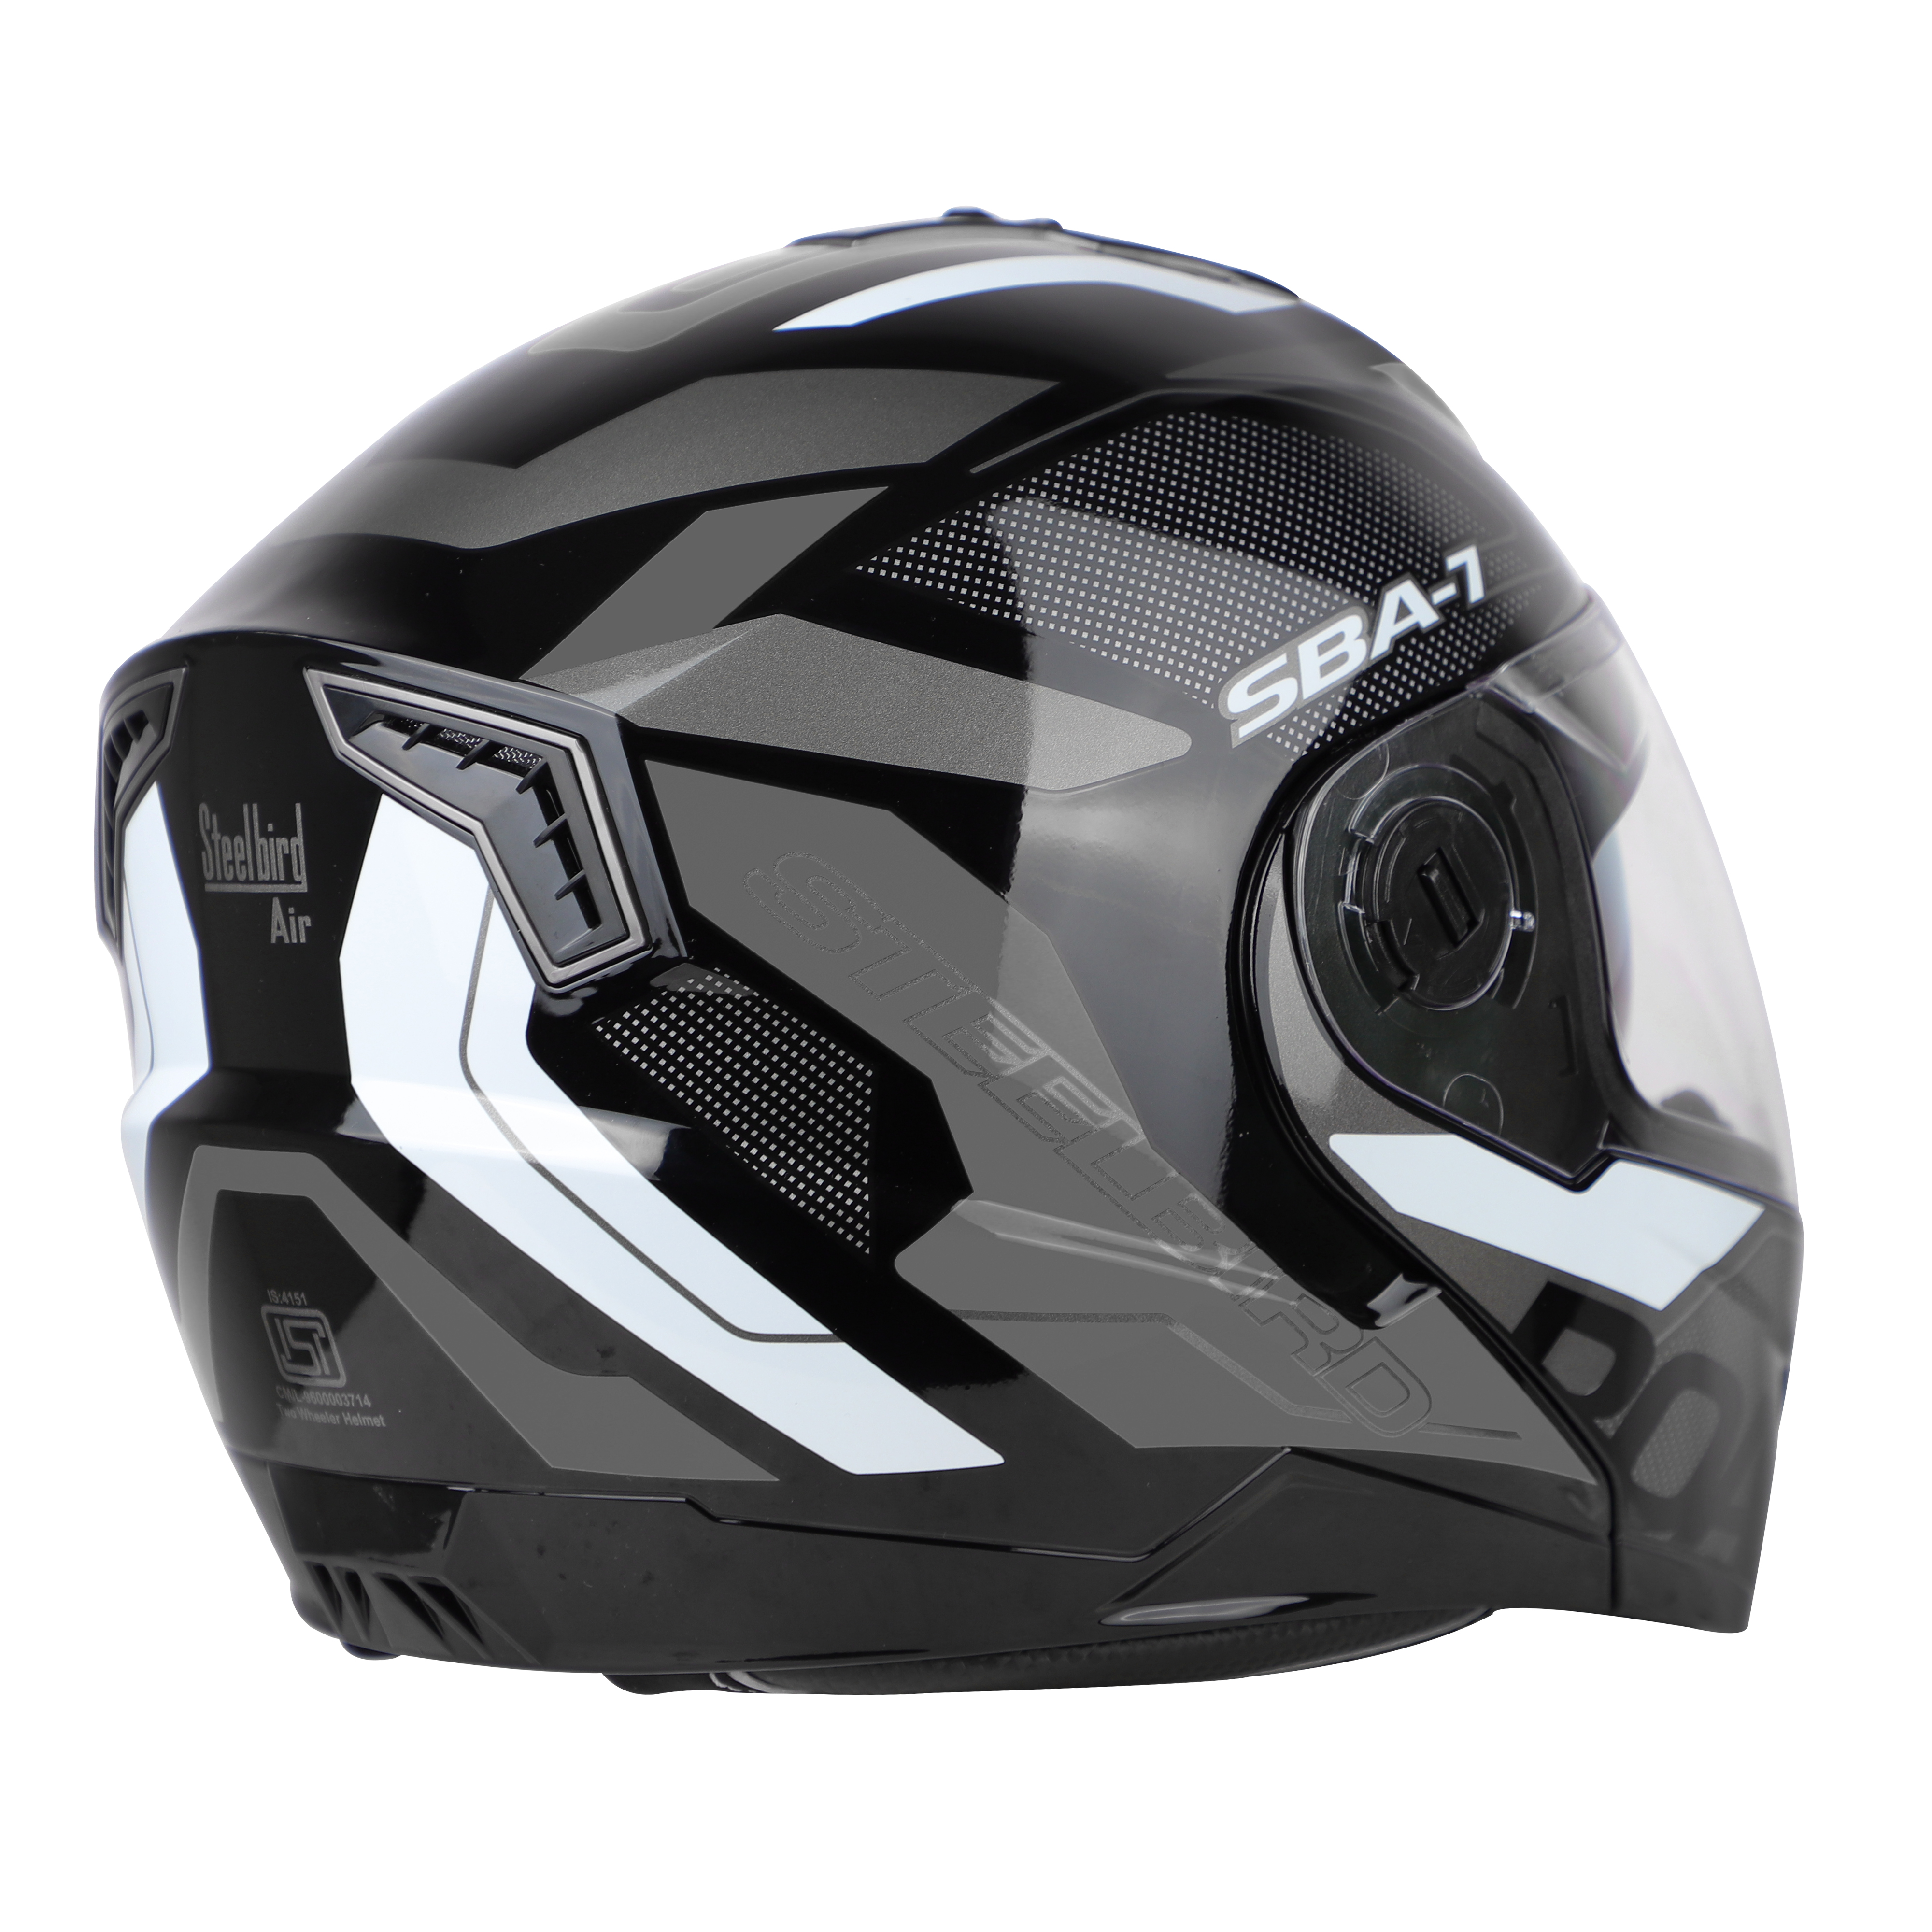 SBA-7 ROAD GLOSSY BLACK WITH GREY (WITH INNER SUNSHIELD)